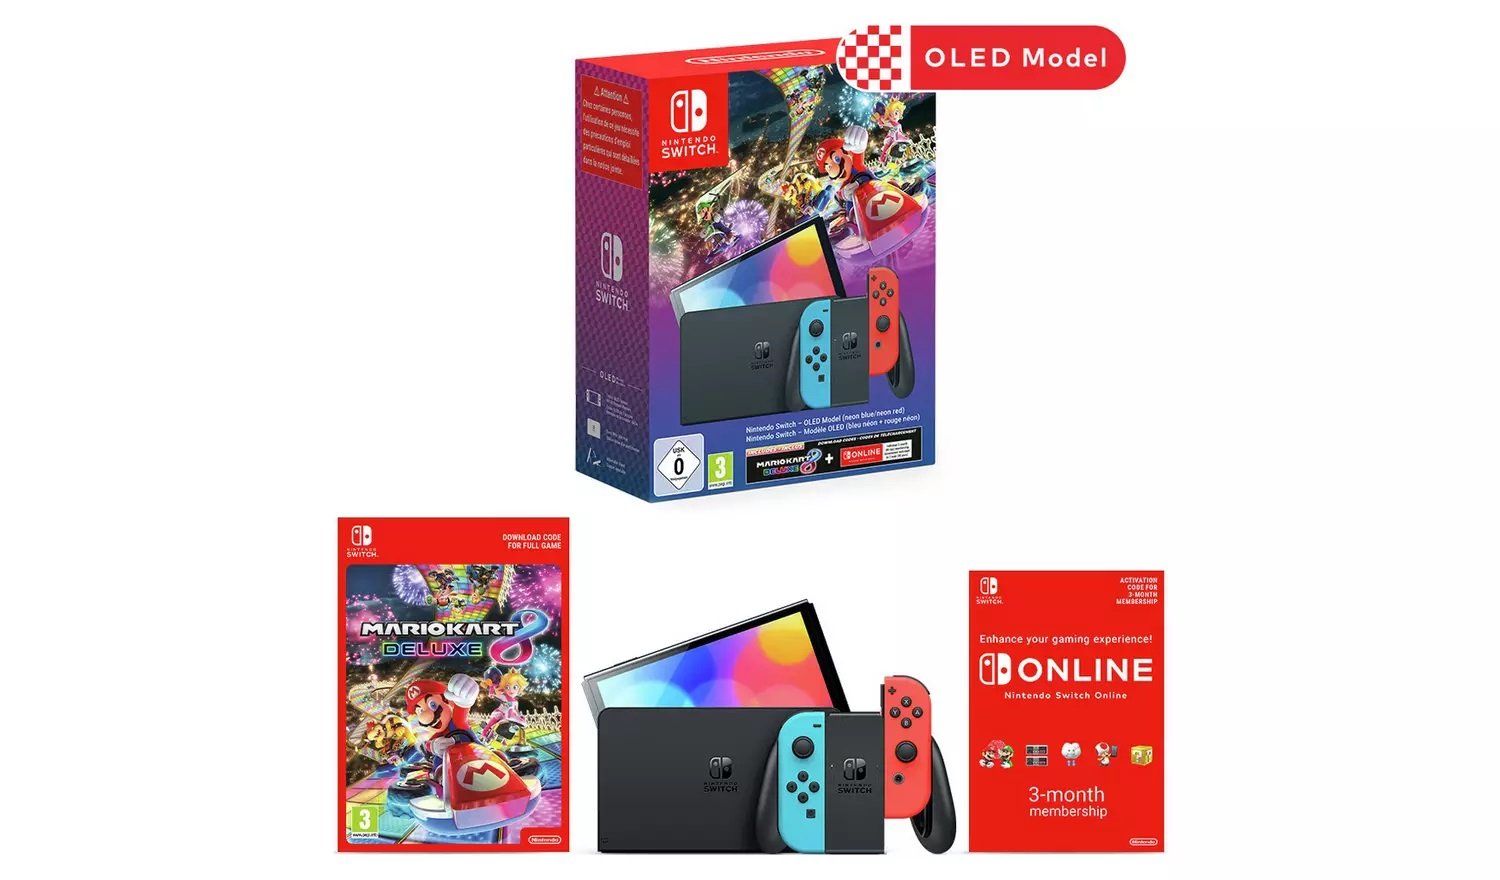 How to pre-order the new Nintendo Switch Mario Kart 8 Deluxe